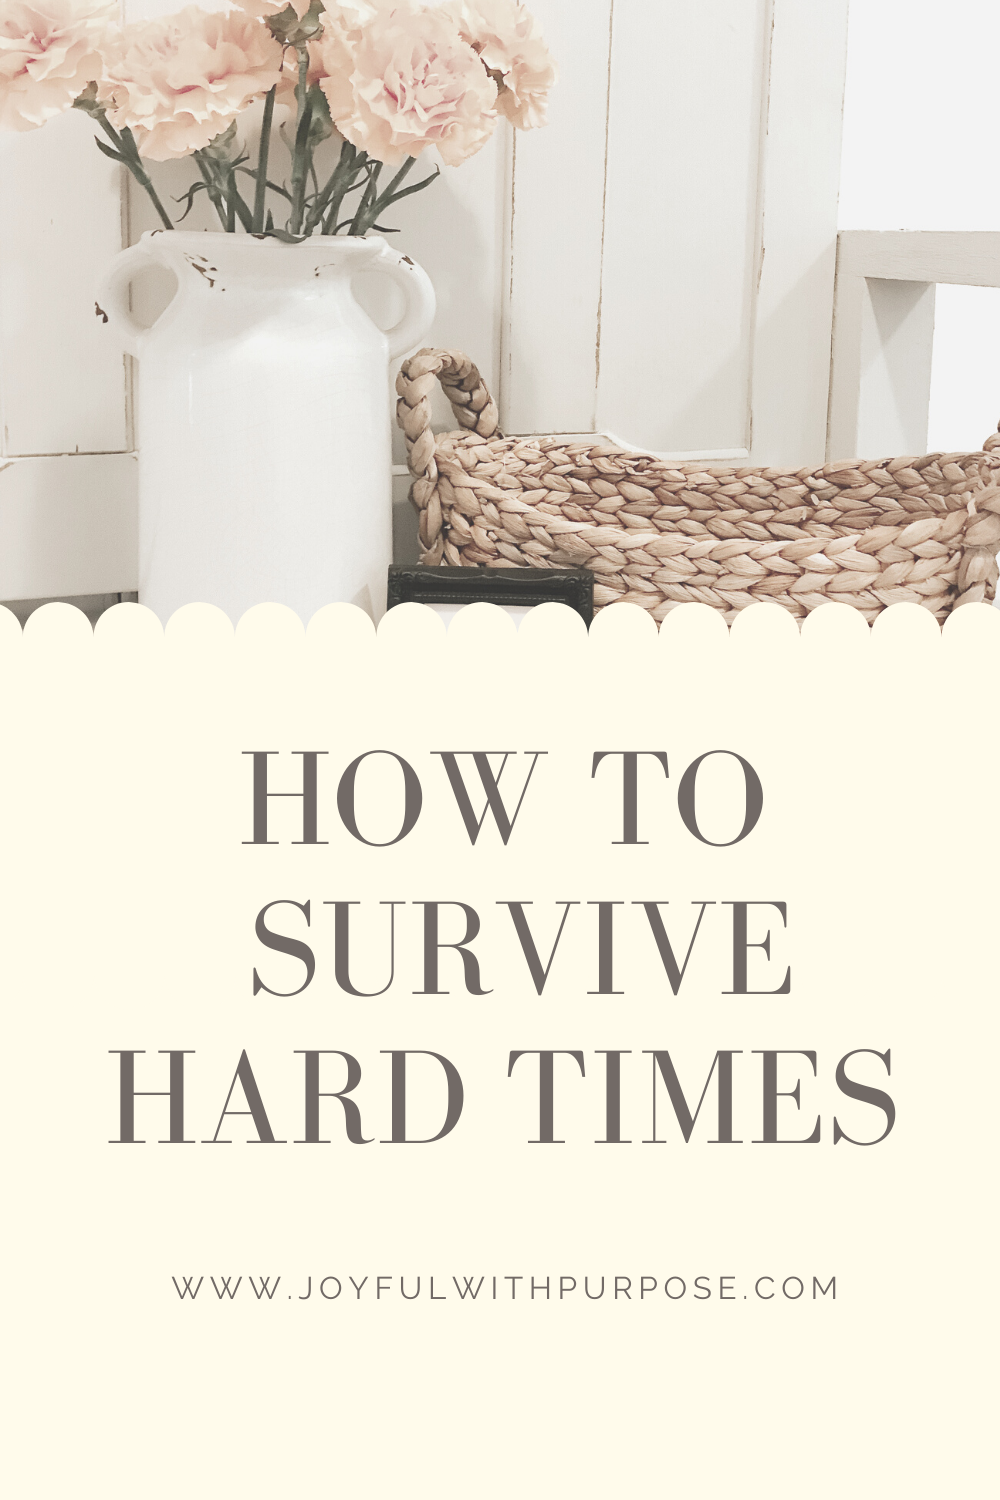 How to Survive the Hard Times